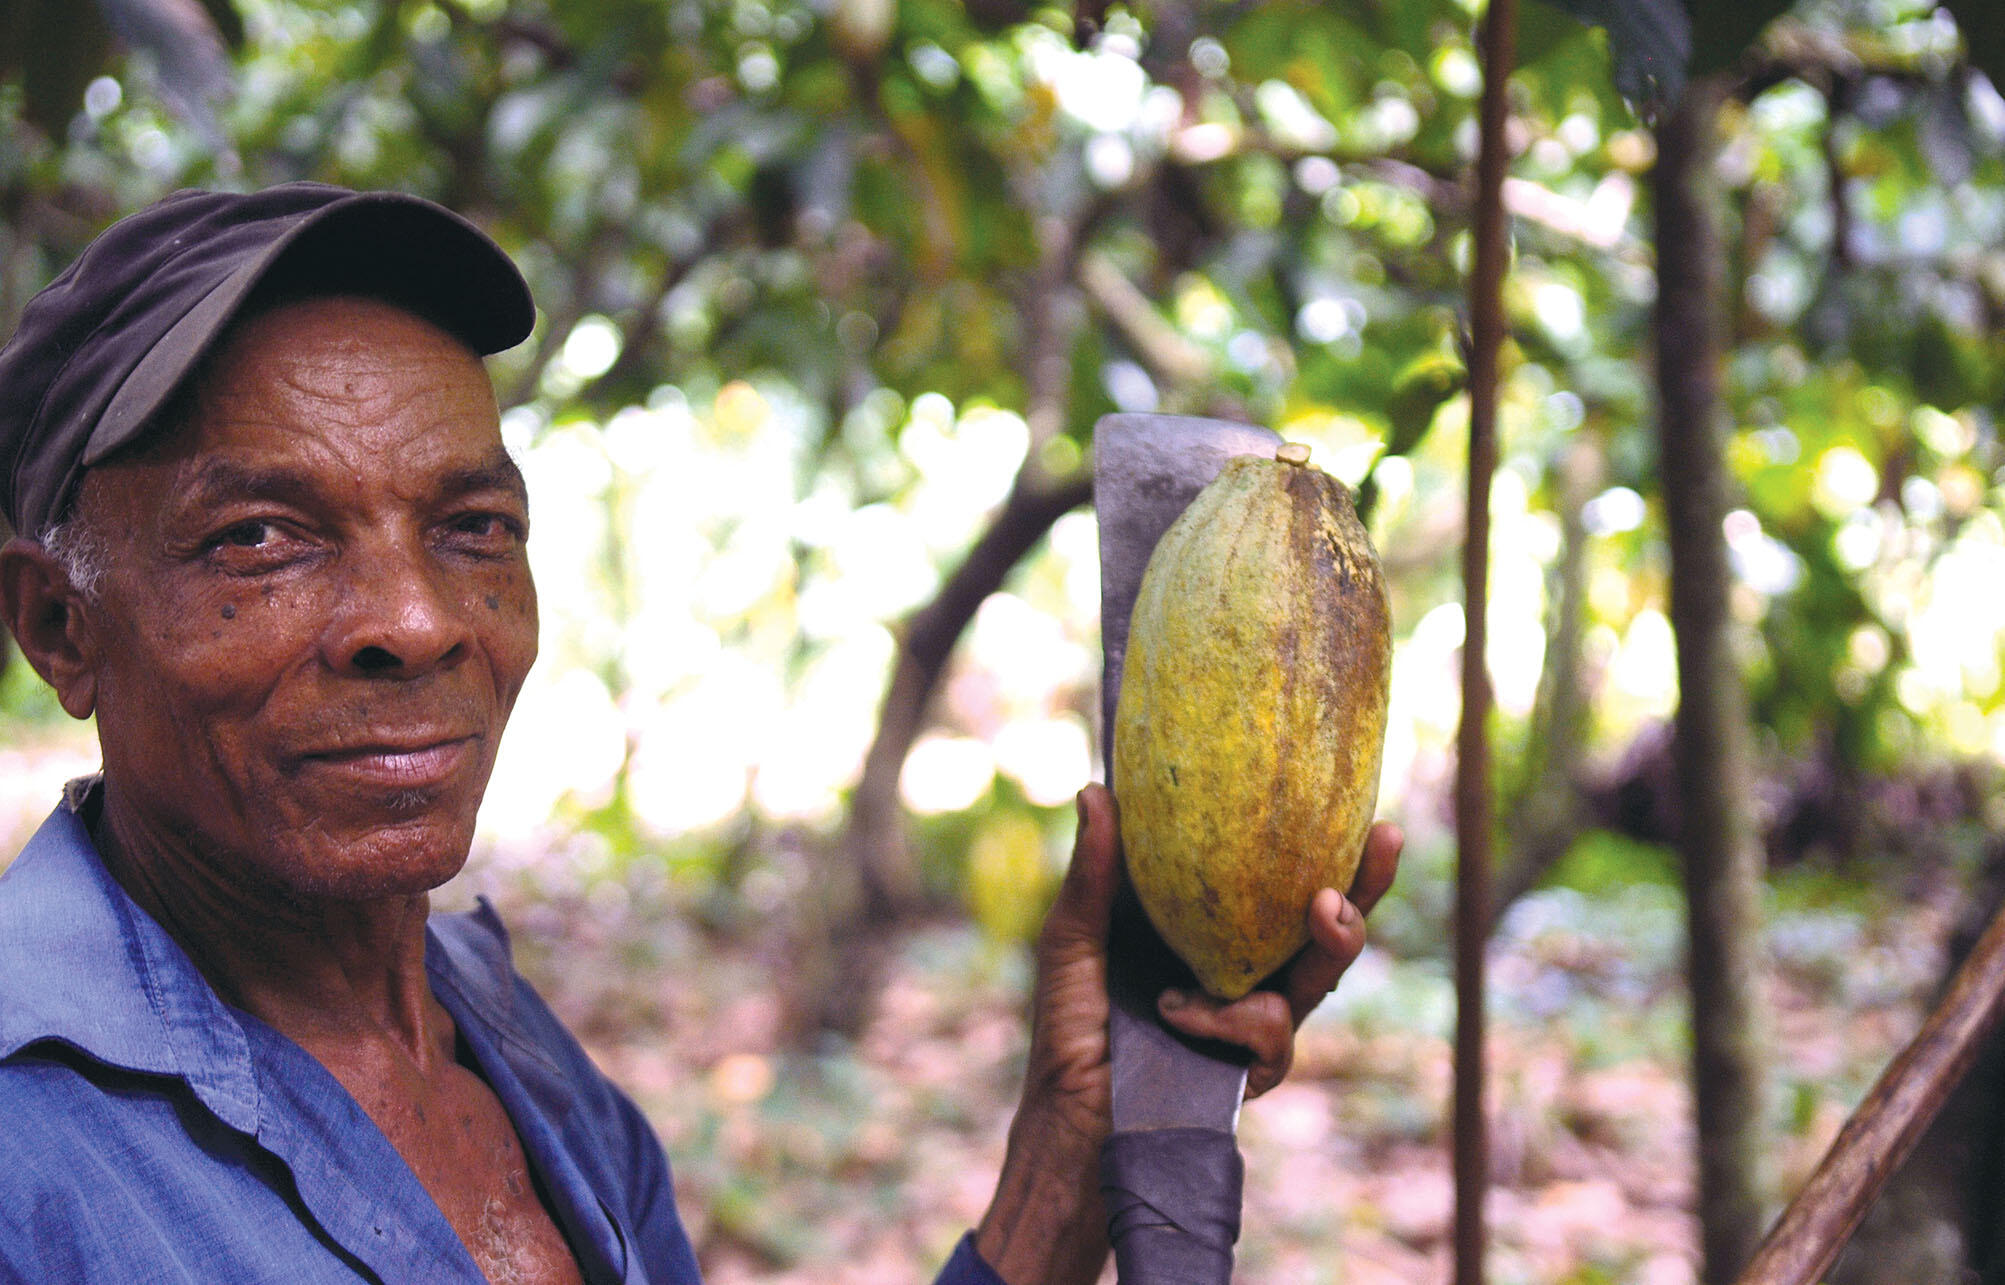 A farmer shows the inside detail of a cacao pod. (Photo by Everjean.)